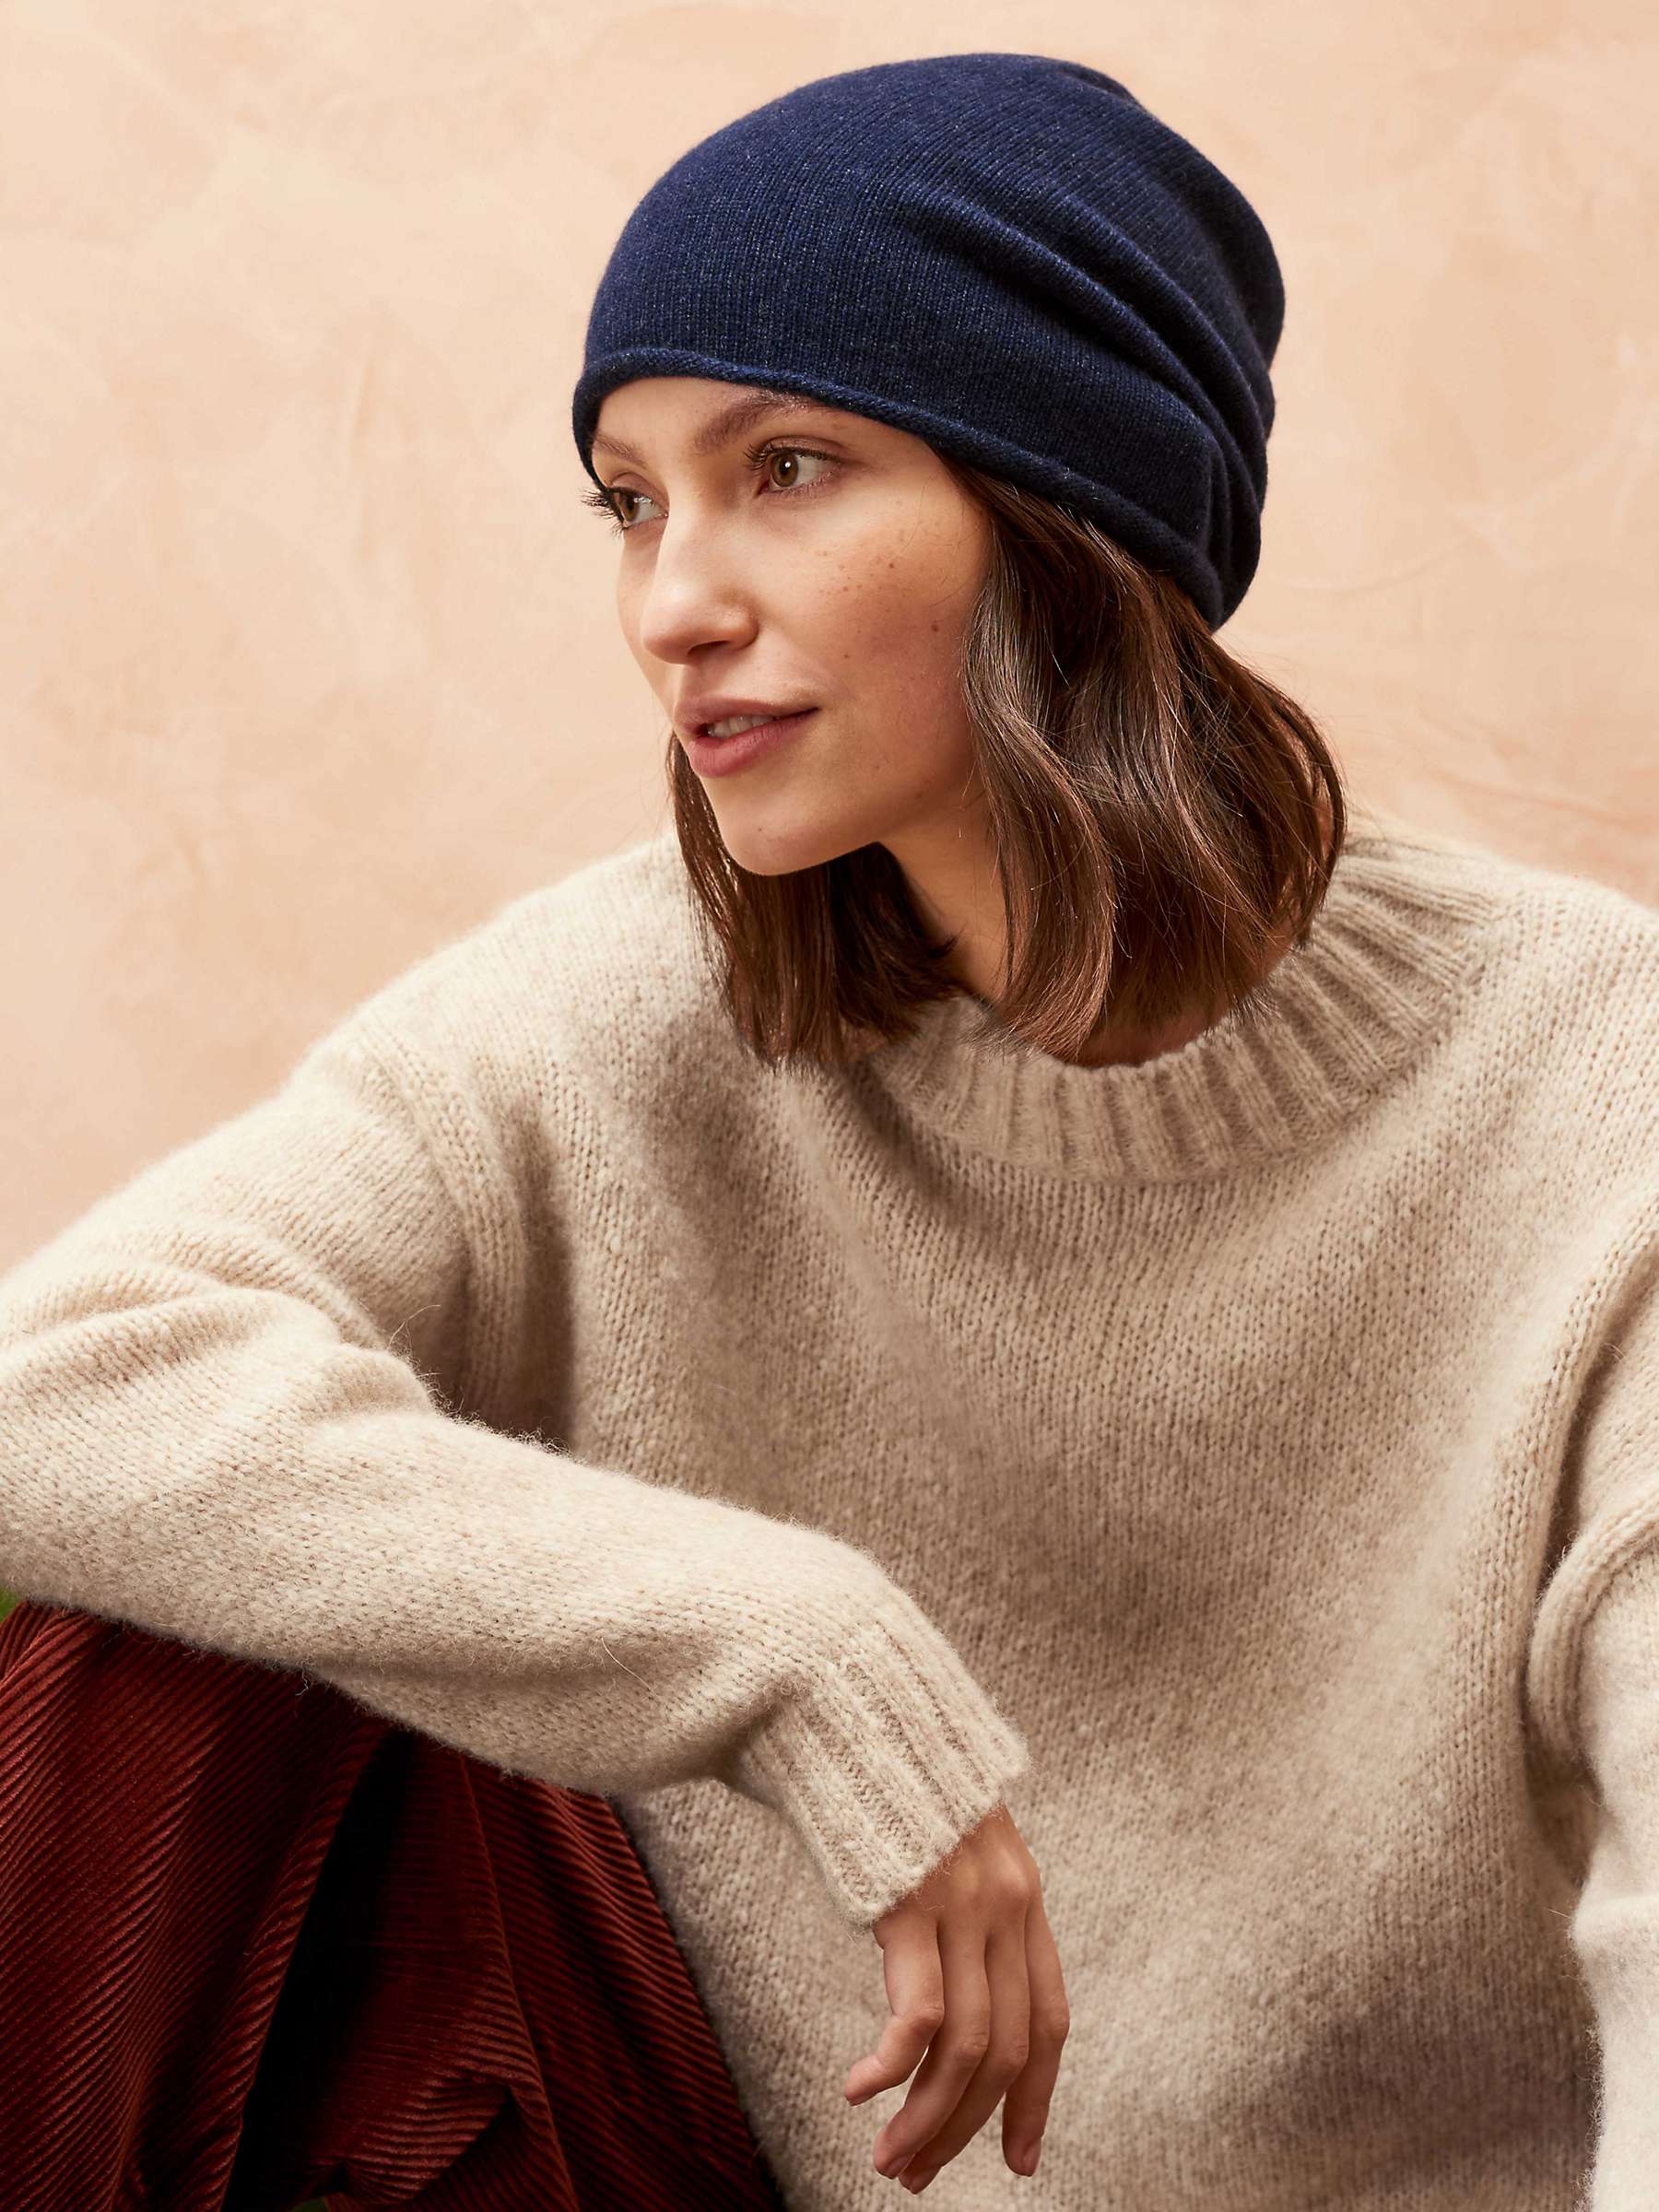 Buy Brora Cashmere Slouchy Beanie Hat Online at johnlewis.com